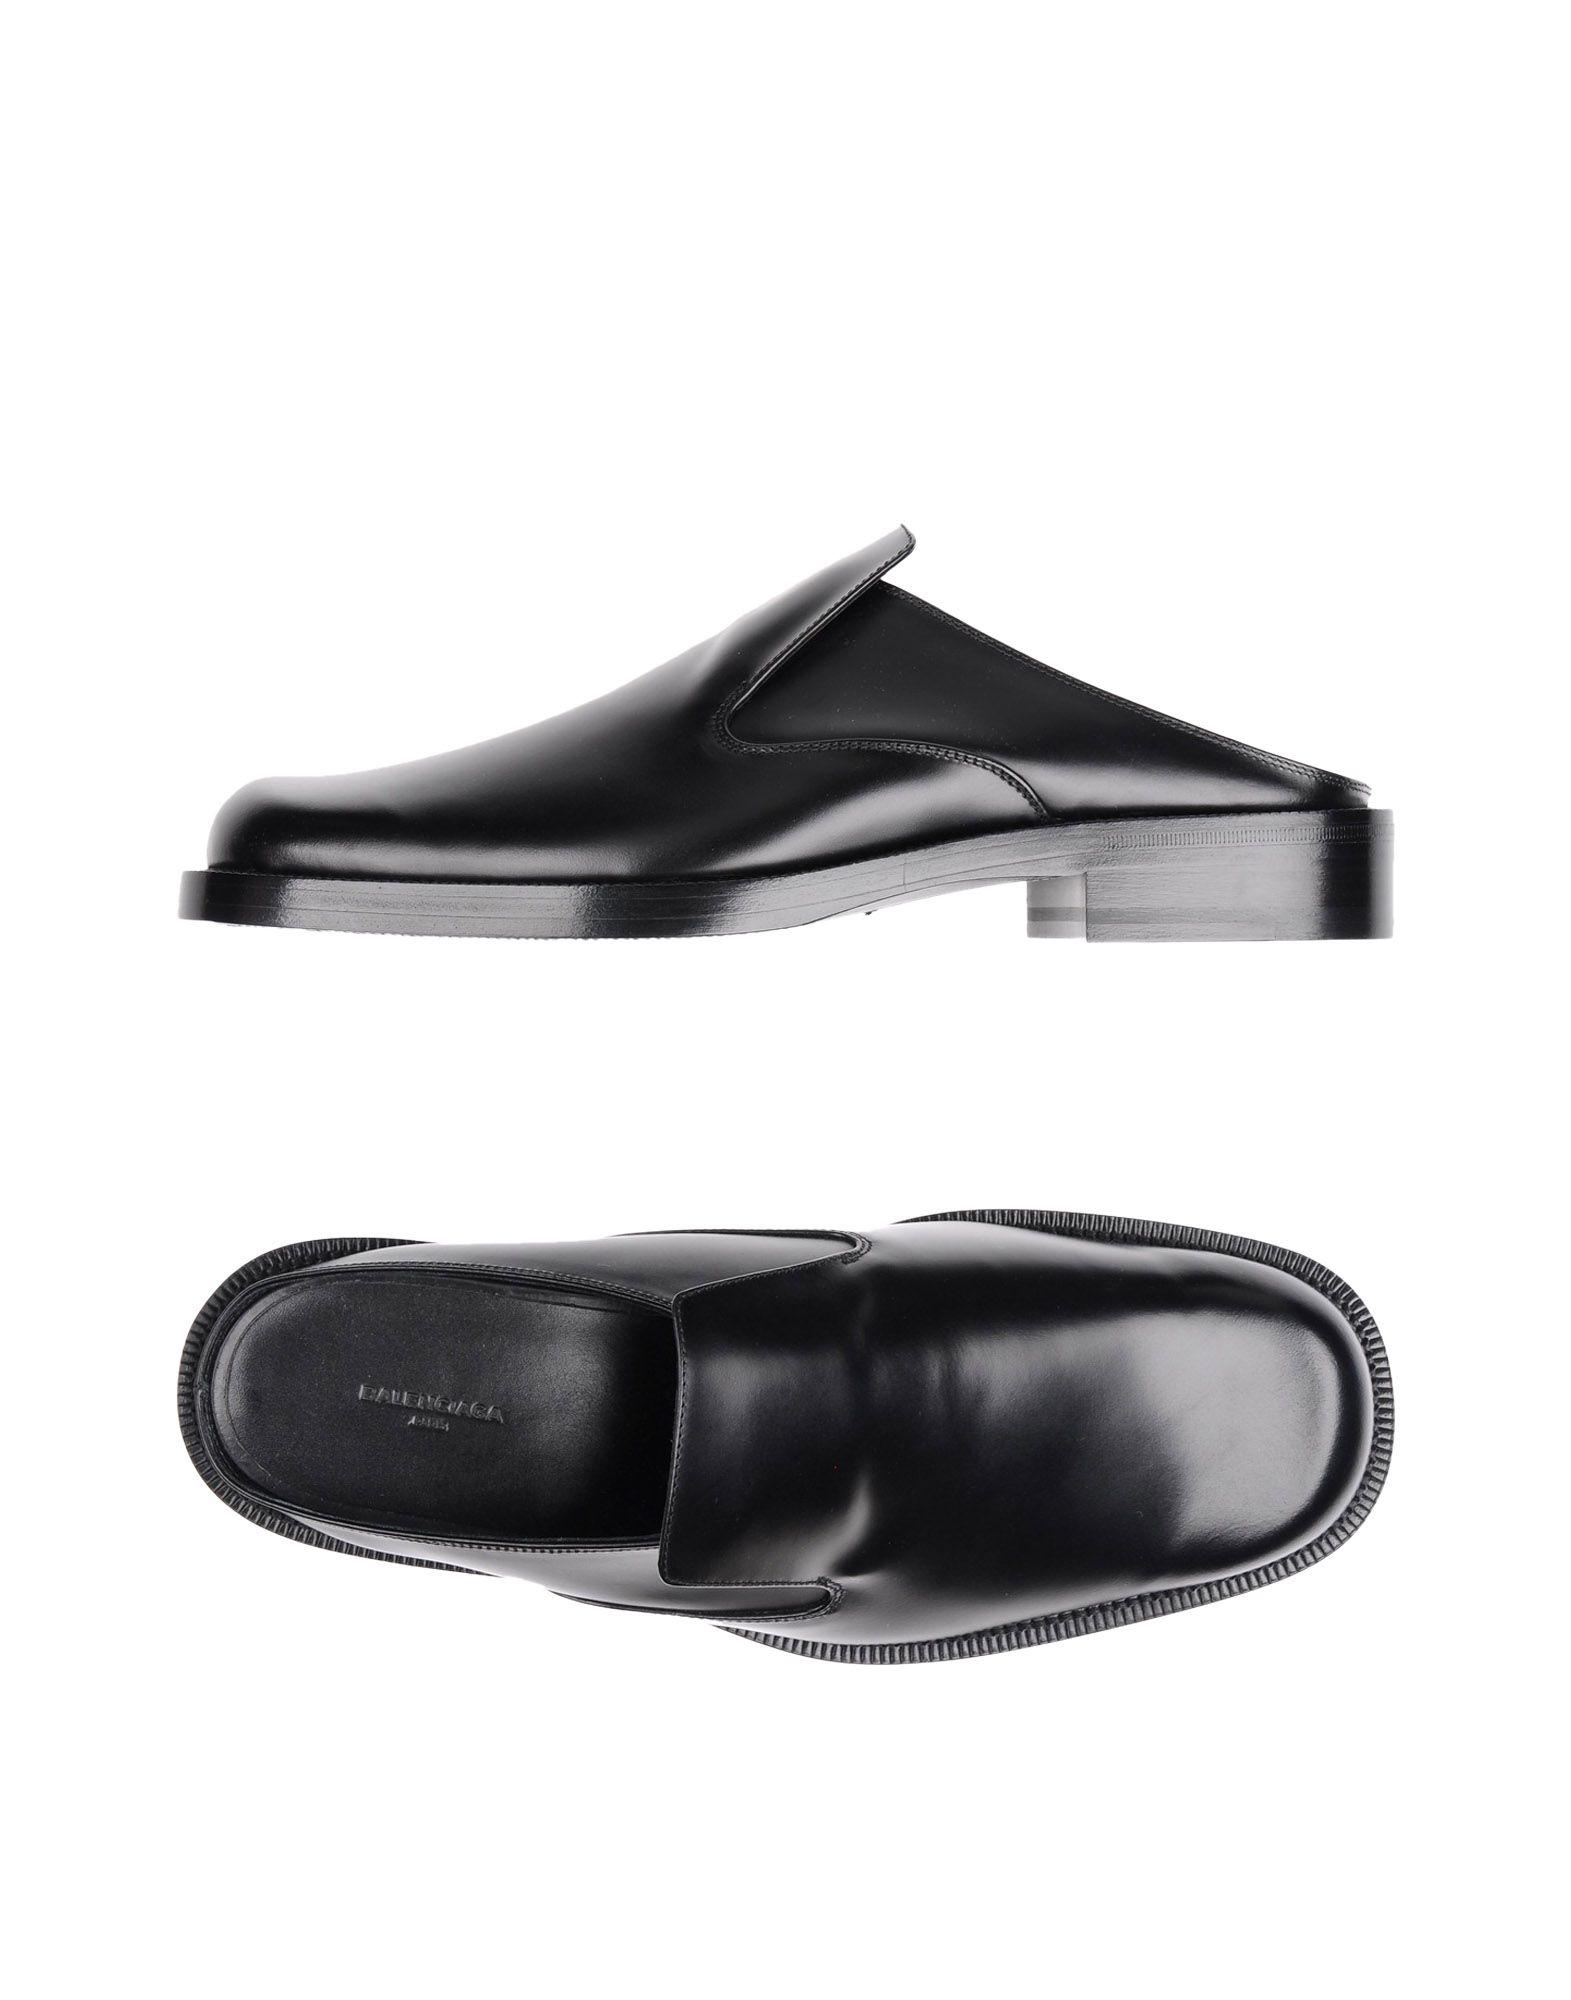 Balenciaga Leather Mules in Black for Men - Lyst